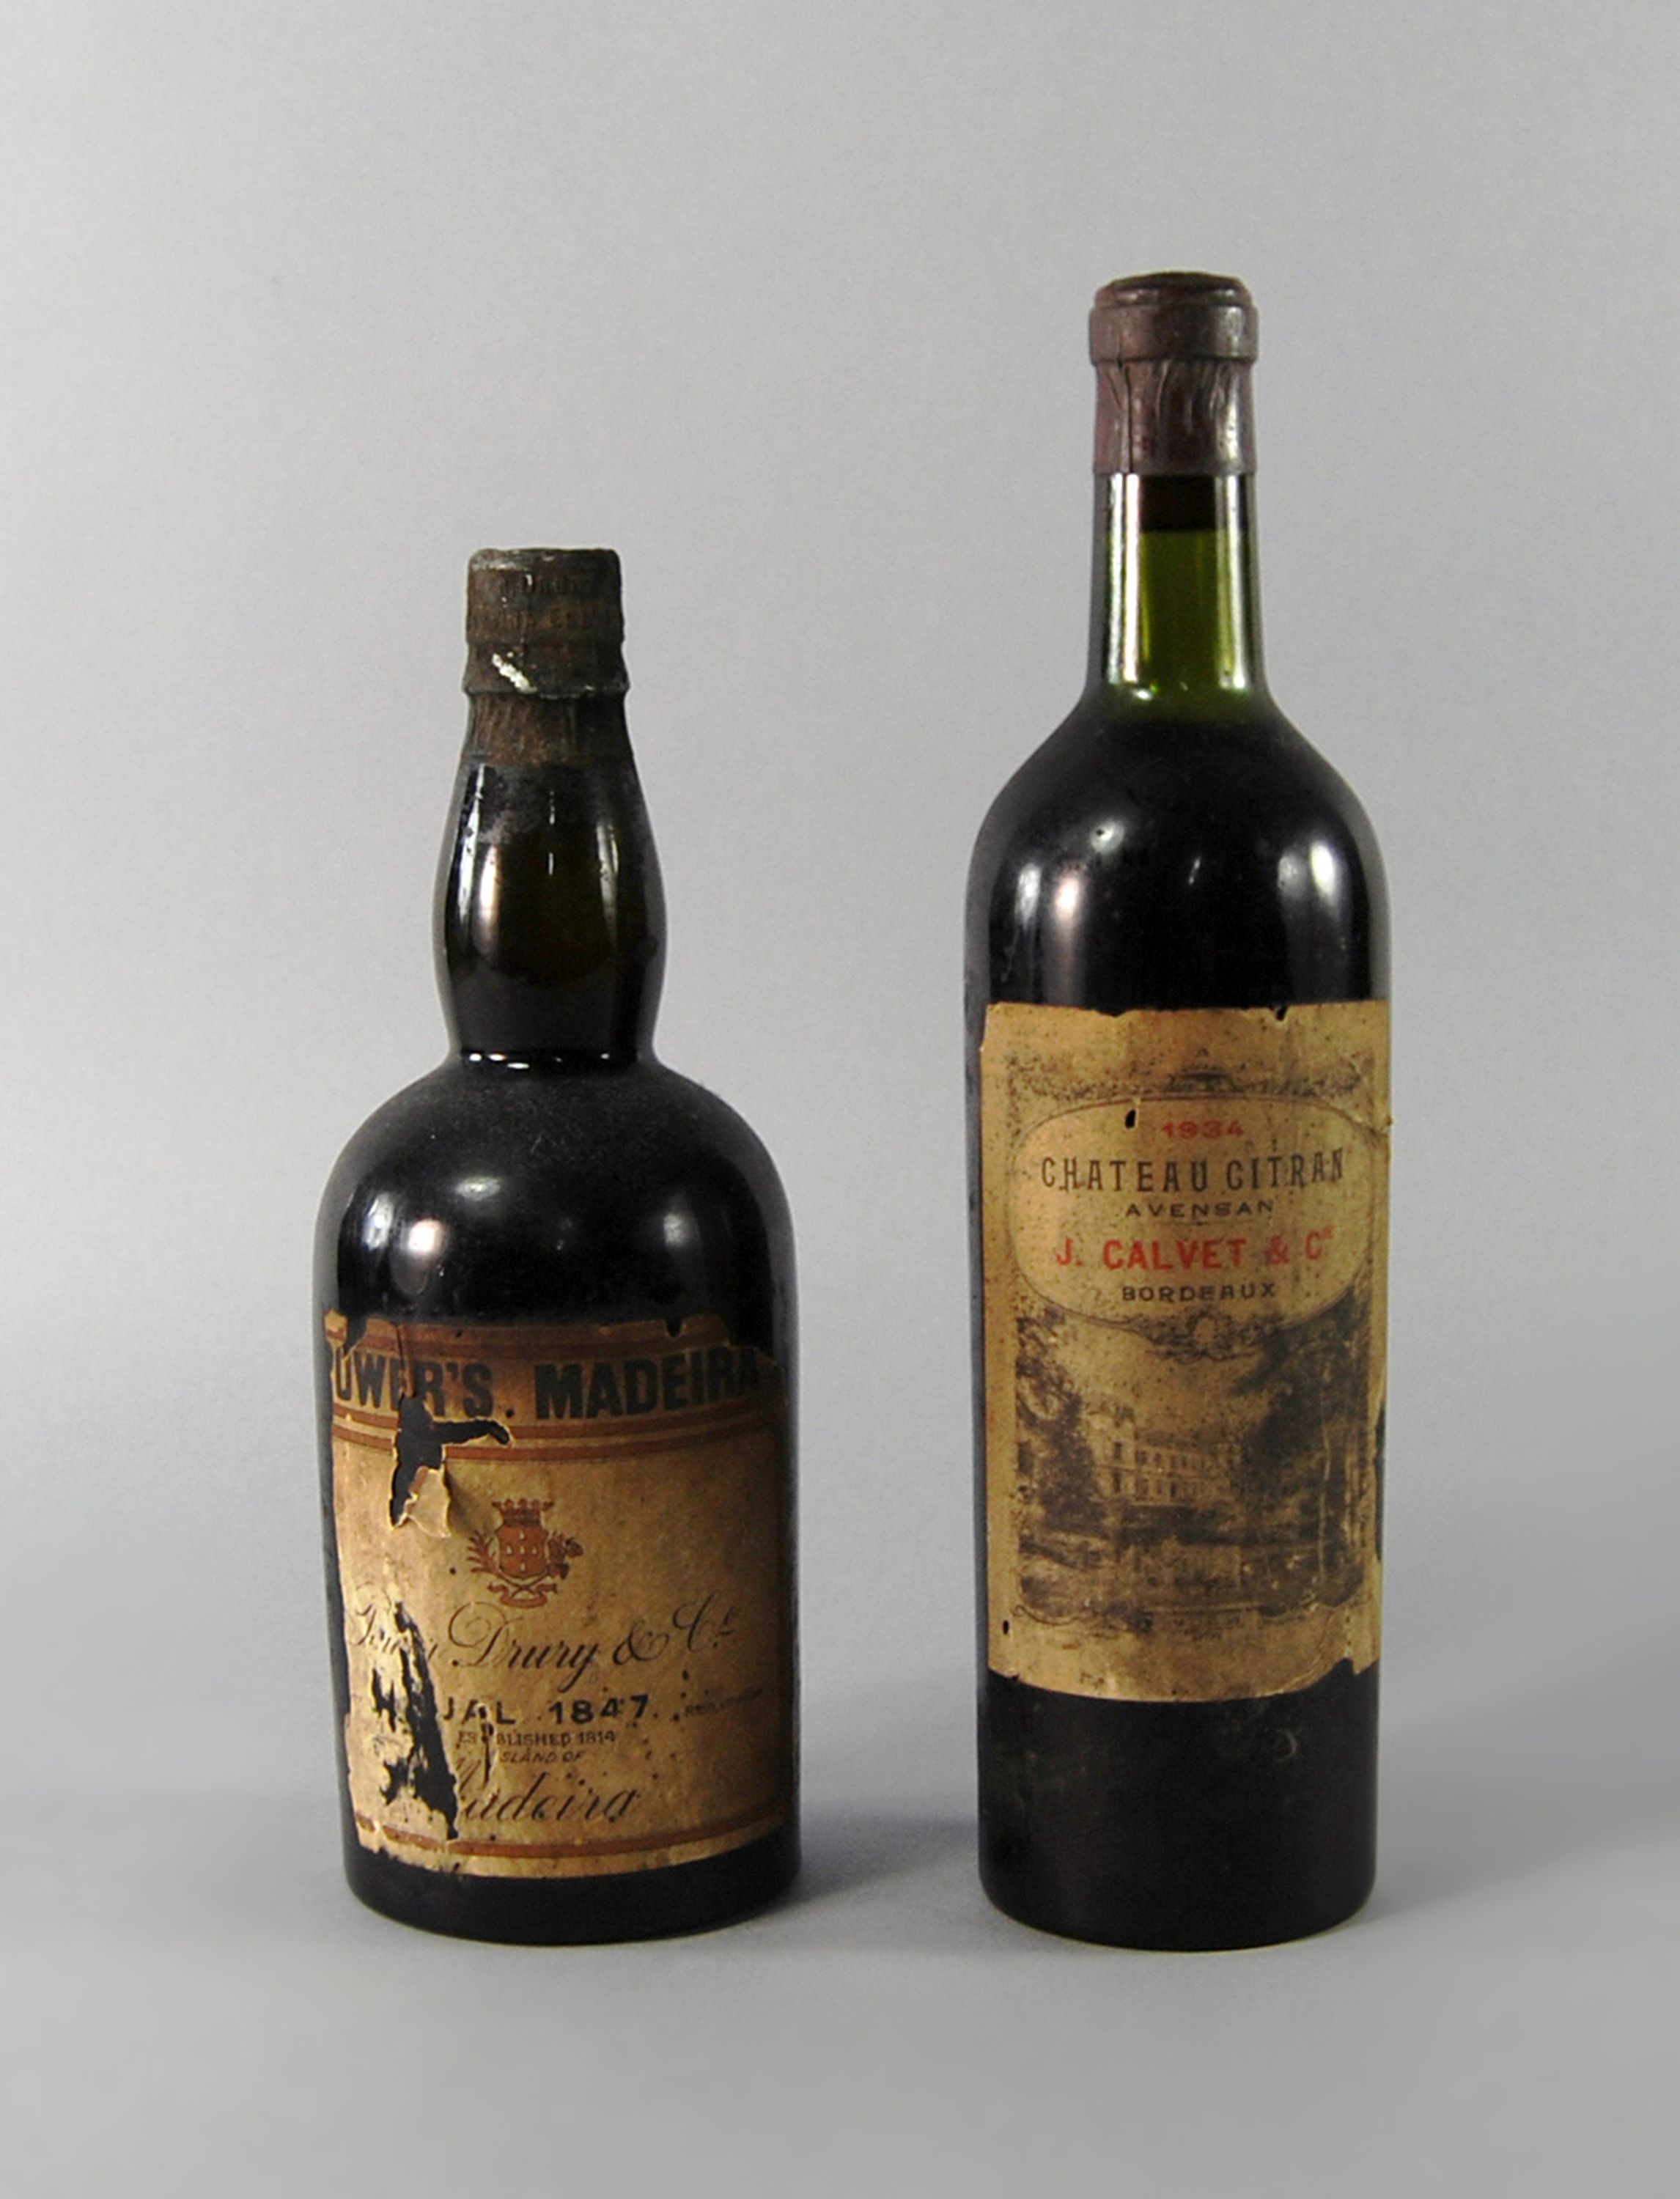 A bottle of Power's Madeira, Peter Drury and Co.